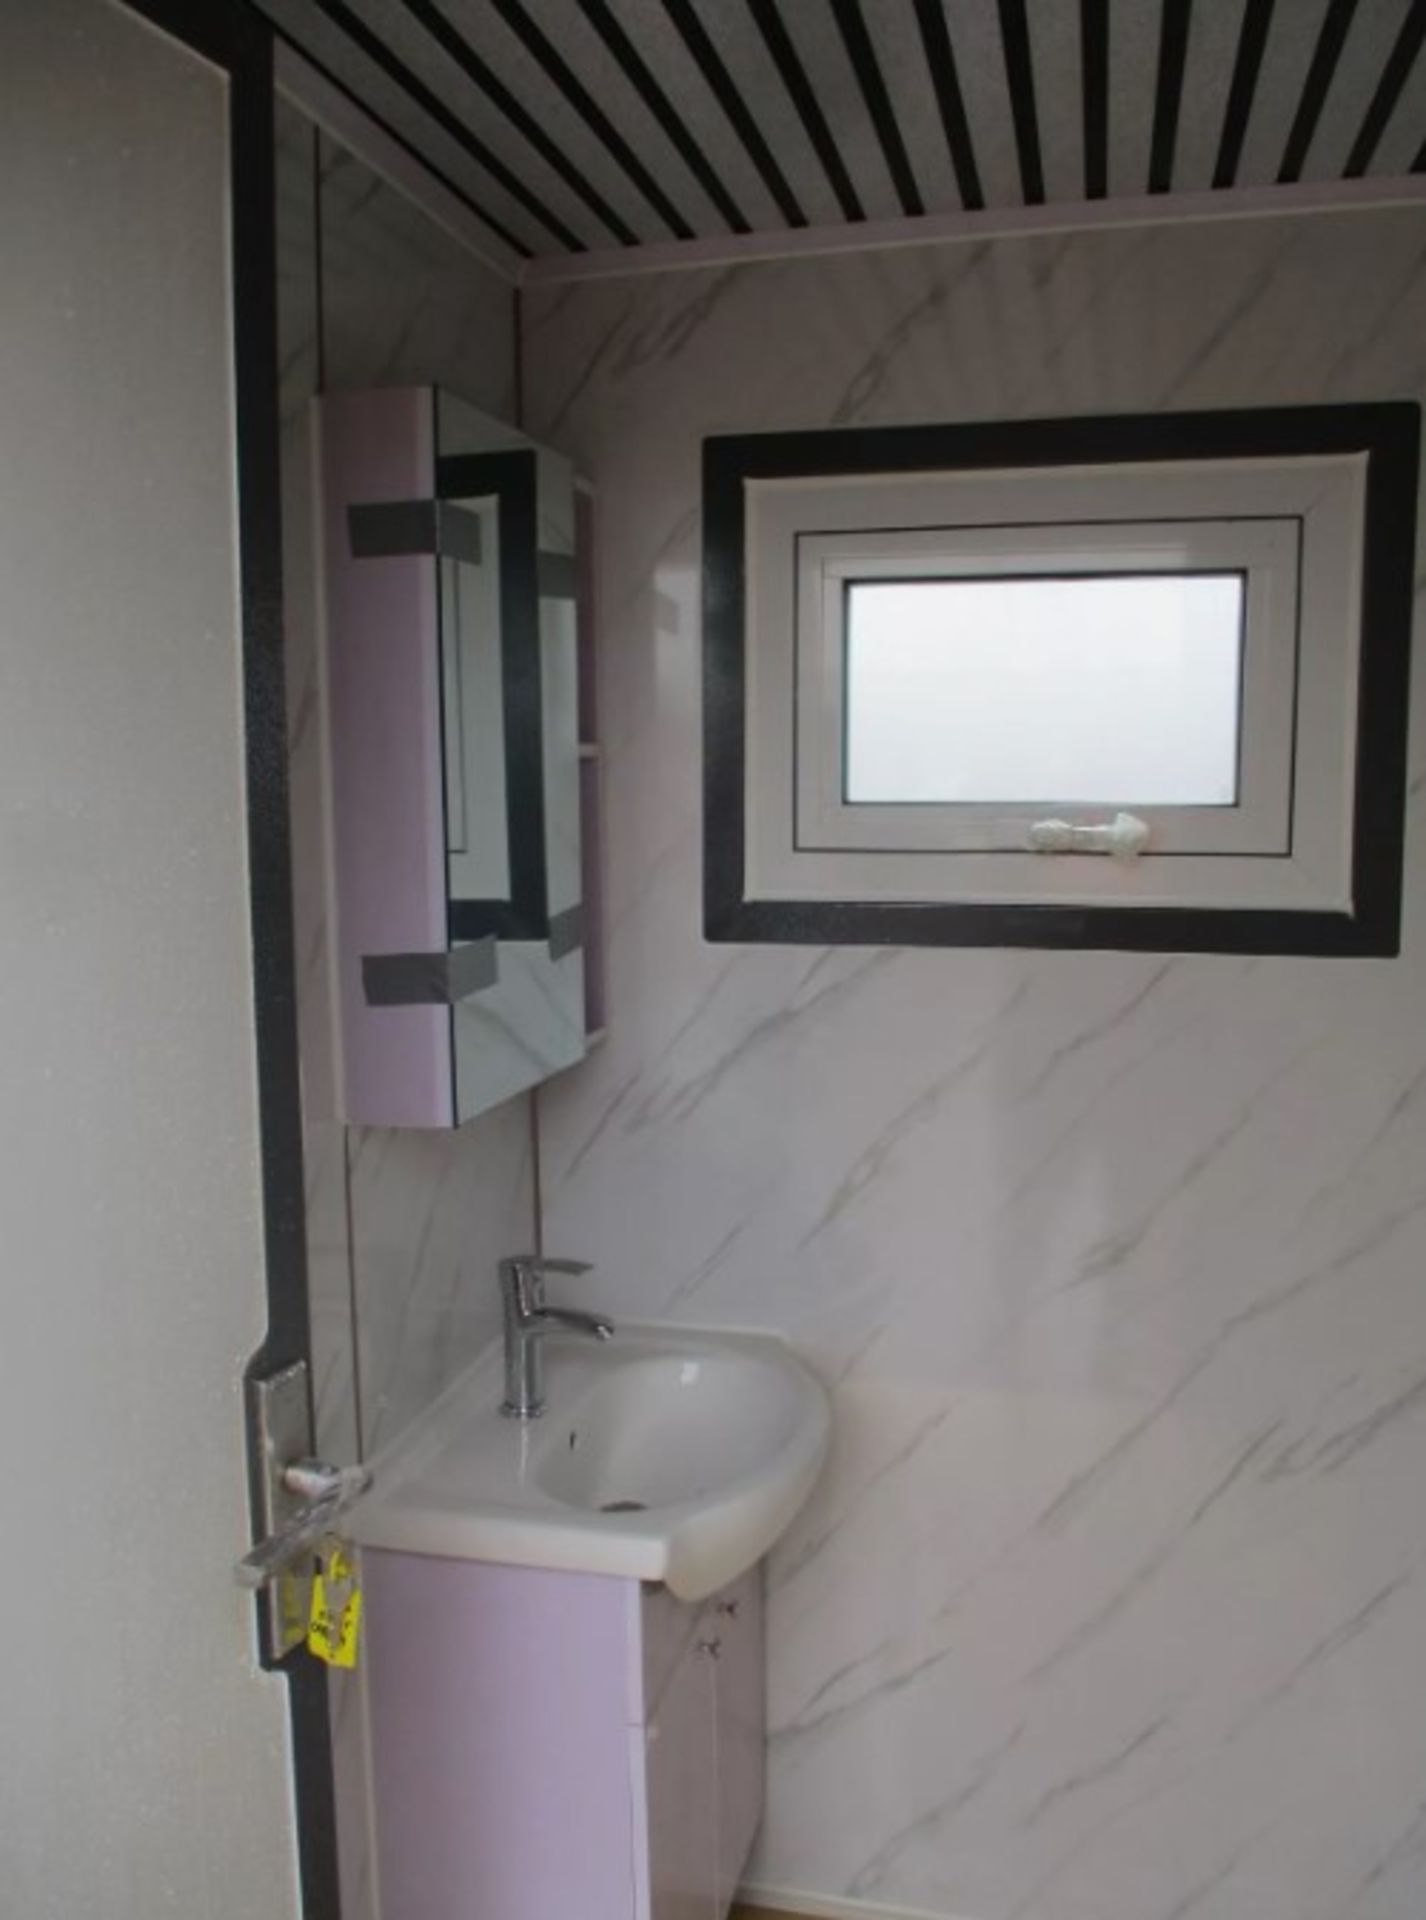 SHIPPING CONTAINER SHOWER/TOILET BLOCK - COMPACT AND CONVENIENT - Image 3 of 9